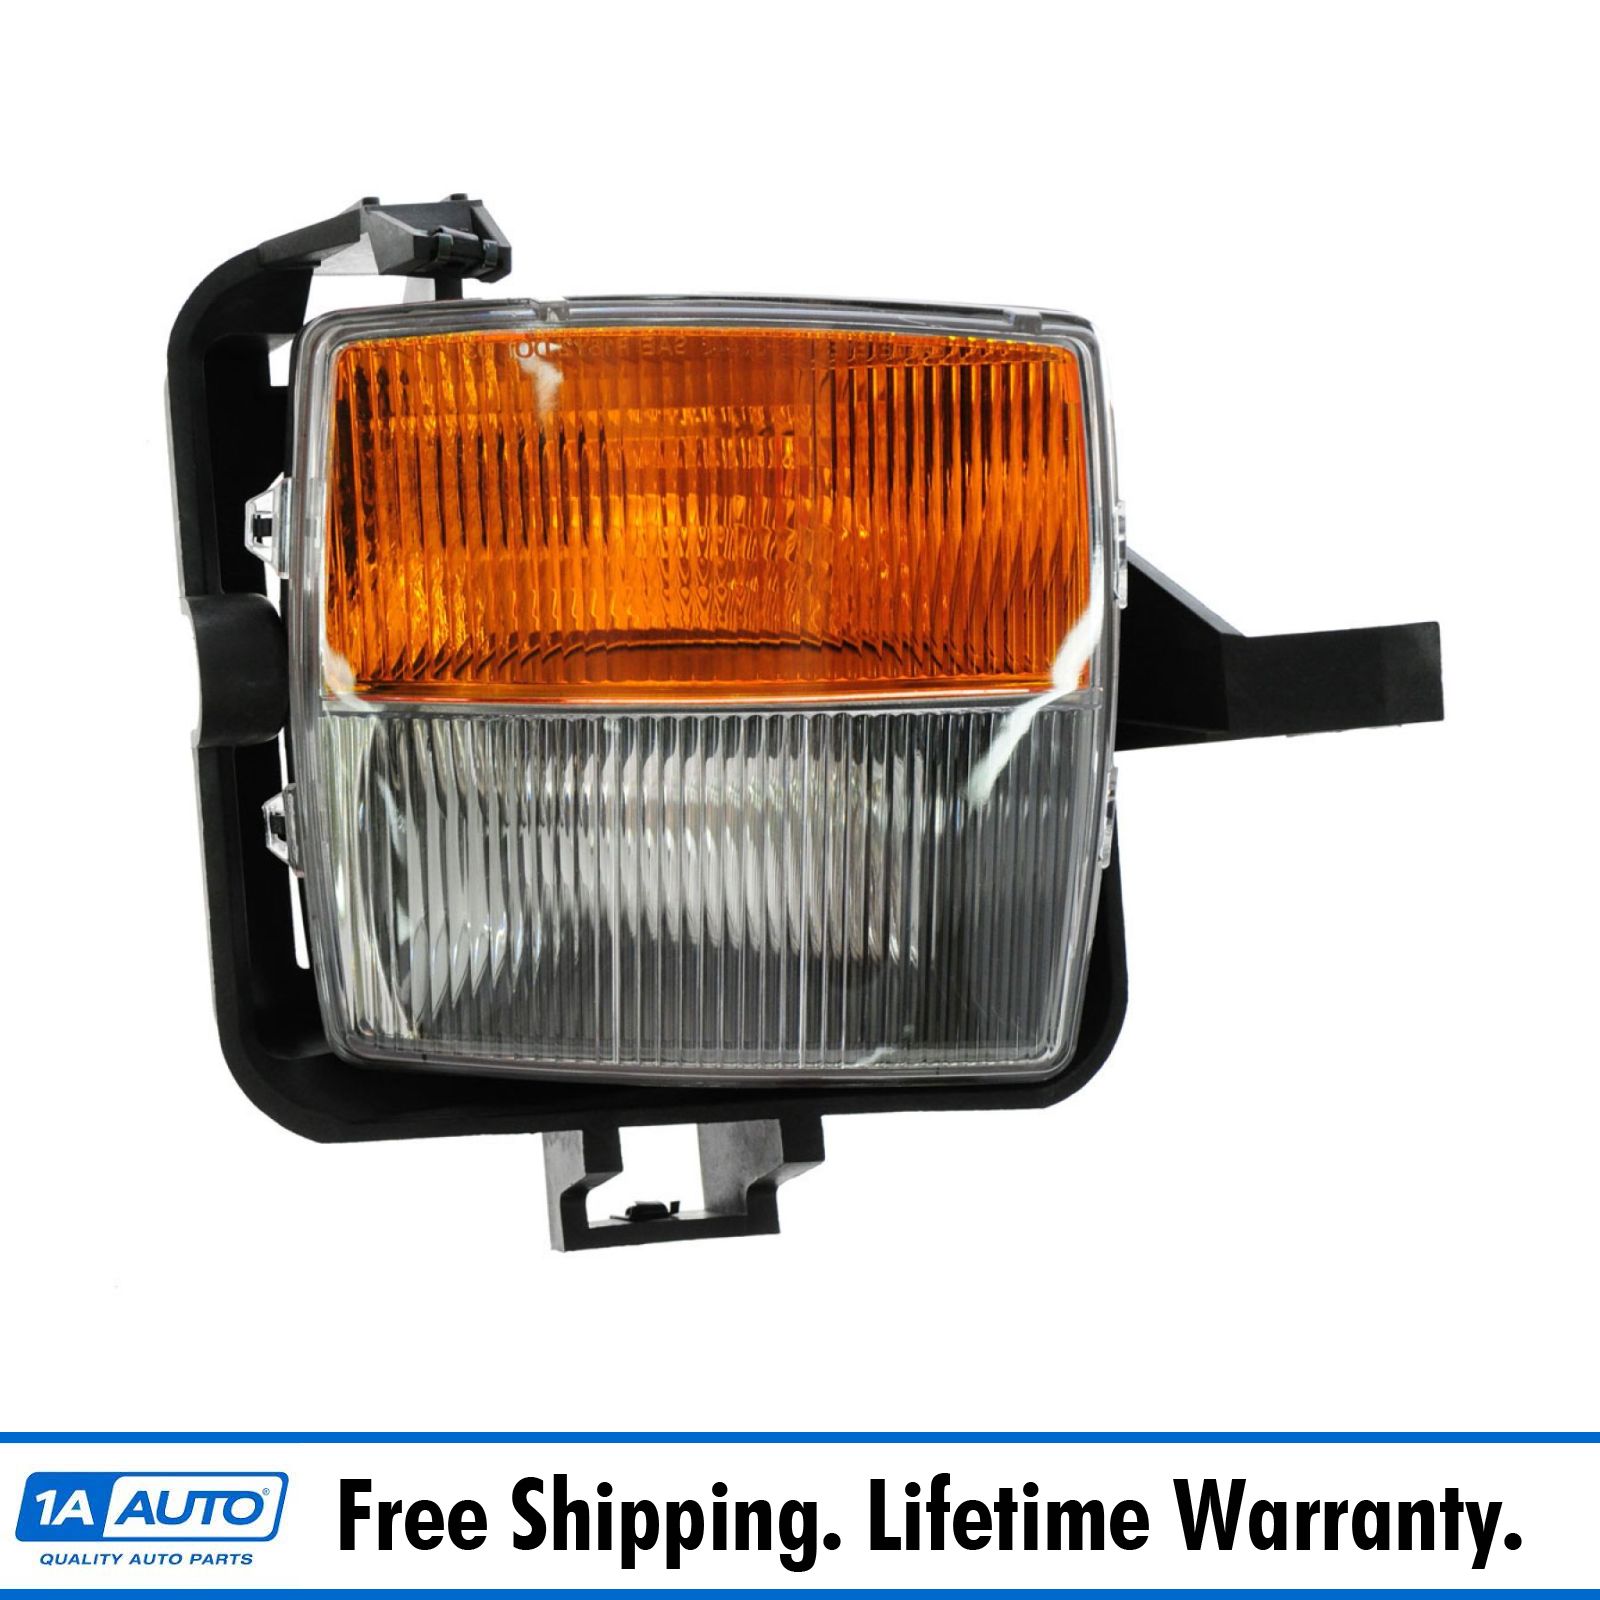 Fog Driving Light Turn Signal Lamp Passenger Right RH for 03-07 Cadillac CTS | eBay 2004 Cadillac Cts Front Turn Signal Bulb